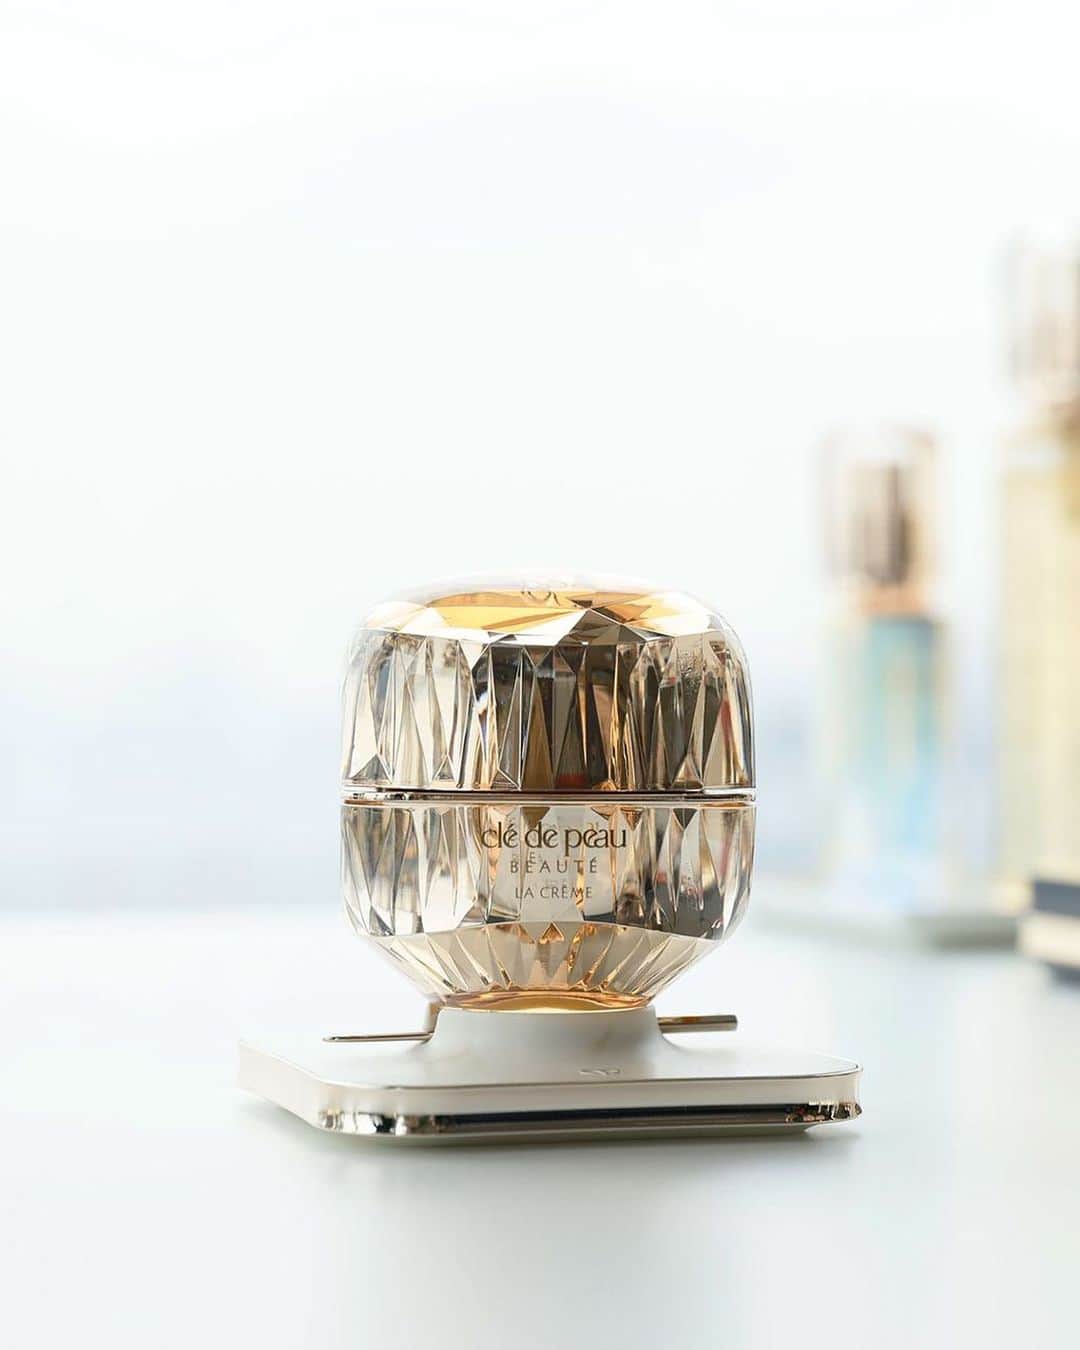 Clé de Peau Beauté Officialさんのインスタグラム写真 - (Clé de Peau Beauté OfficialInstagram)「As you wind down in the evening, it's the perfect time to indulge in some self-care, and that means taking time for your night-time routine. The final and most important step of the evening skincare ritual is #LaCreme, designed to amplify #SkinIntelligence and support your skin’s ability to repair, renew and protect itself overnight.   Step 1: Take a pearl-sized amount of La Crème with a spatula and smooth the product over your skin Step 2: Press your palms against your cheeks and gently glide your hands from the chin to the temples.  Step 3: Repeat three times.   With La Crème in your daily skincare routine,  you’re sure to wake up every morning to bright, beautiful and absolutely radiant skin ✨  夜のスキンケアは、セルフケアに最適な時間です。 夜のスキンケア習慣の仕上げにして最も大切なステップは、クレ・ド・ポー ボーテ #ラクレーム （医薬部外品）で「肌の知性*」を輝かせること。ラ・クレームは夜の肌メカニズムに着目し、唯一無二の輝きで満たすハイパフォーマンスクリームです。  ステップ 1：夜のお手入れの最後に、スパチュラにパール粒 1 コ分を目安にとり、顔全体にていねいになじませます。 ステップ 2：手のひら全体を使い、ほおを包みこむようにして、あご先からこめかみまで持ち上げます ステップ 3：これを 3 回繰り返します。  ラ・クレームを毎日のスキンケアに取り入れることで、とろけるように肌へなじんで豊かなうるおいとはり・弾力をもたらし、若々しい印象があふれだす輝かしい未来へ導きます✨  *「肌の知性」とは、すべての人が生まれながらにそなえている、生涯美しい輝きを保ち続けるための鍵です。」10月31日 13時00分 - cledepeaubeaute